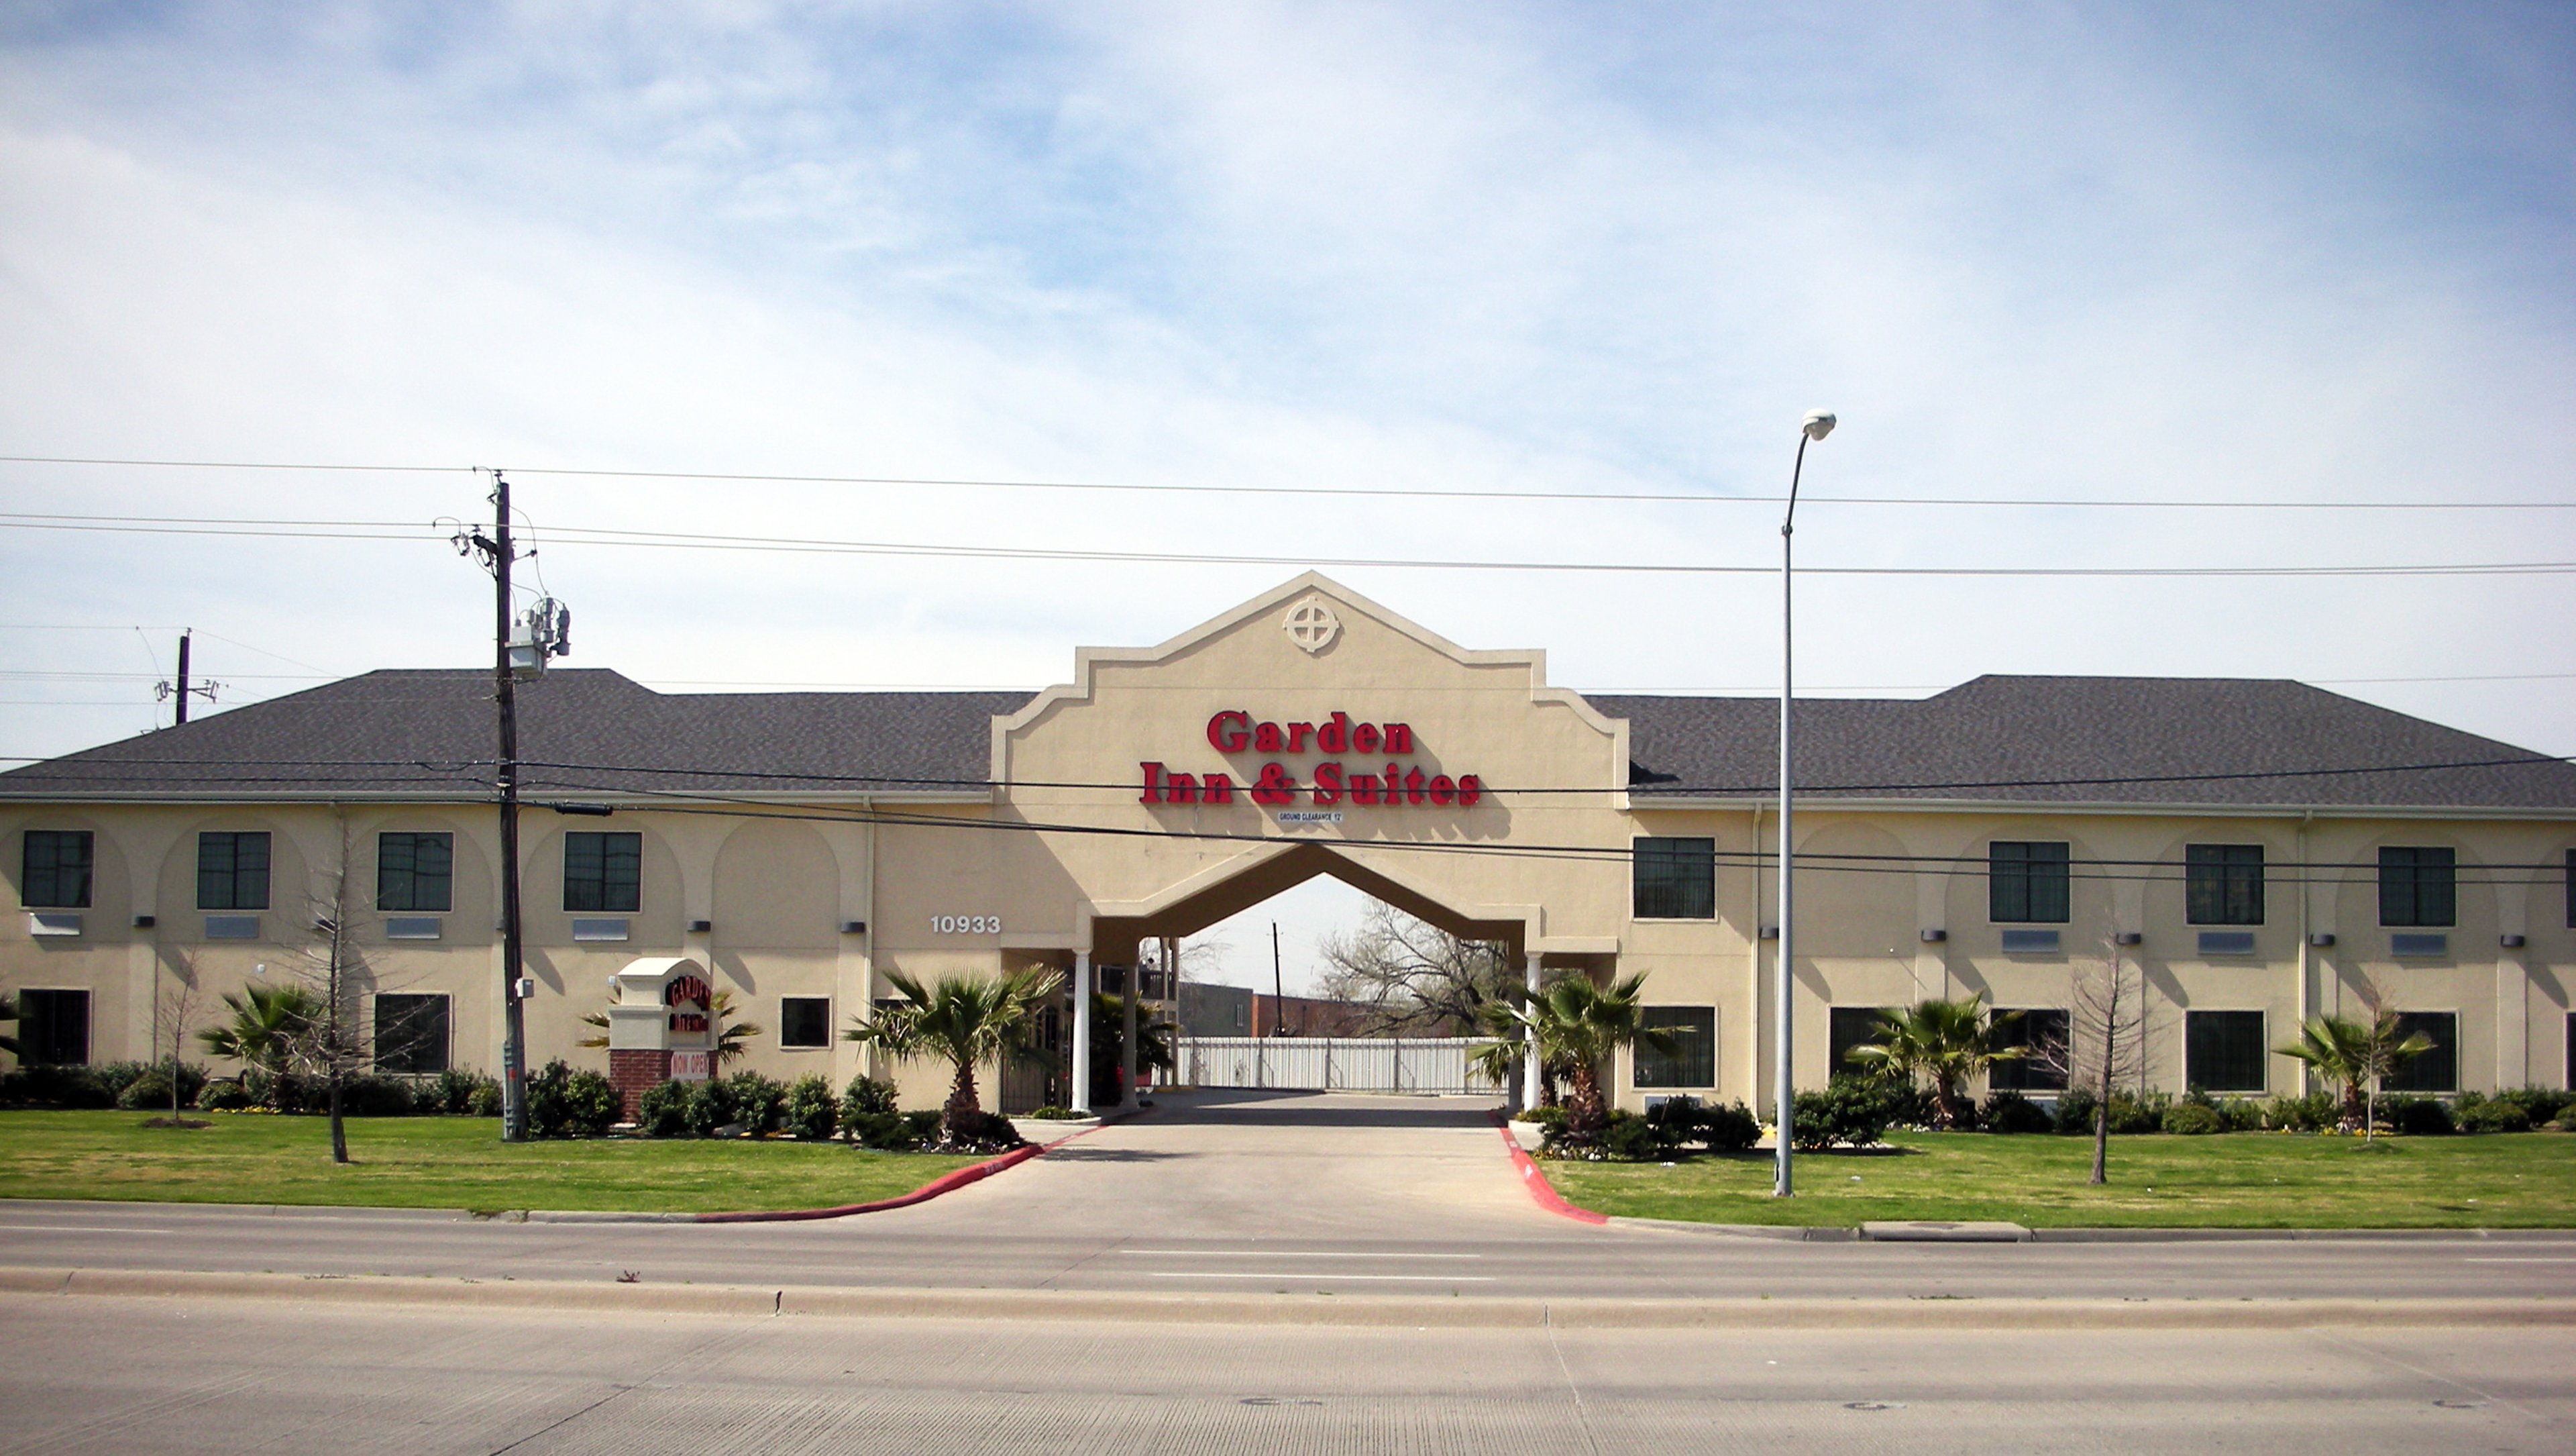 Garden Inn and Suites Dallas image